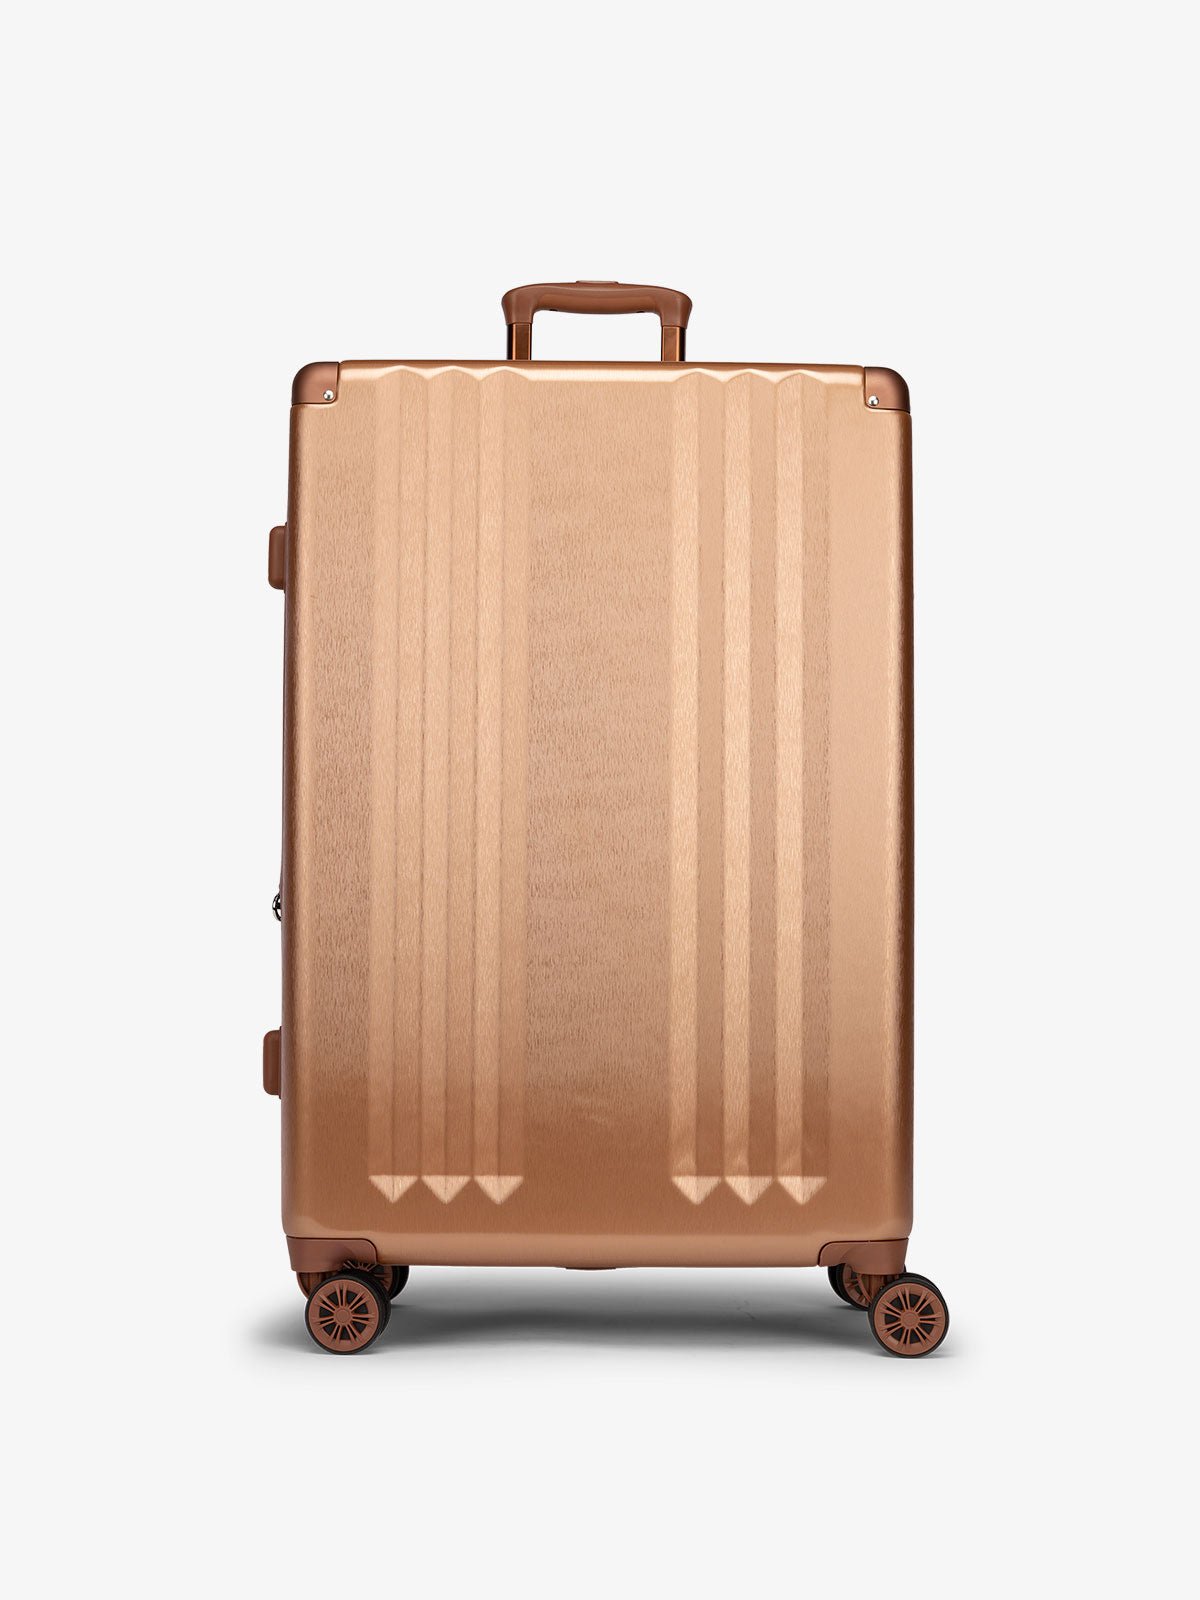 CALPAK Ambeur large 30 inch hardshell luggage featuring 360 spinner wheels in copper